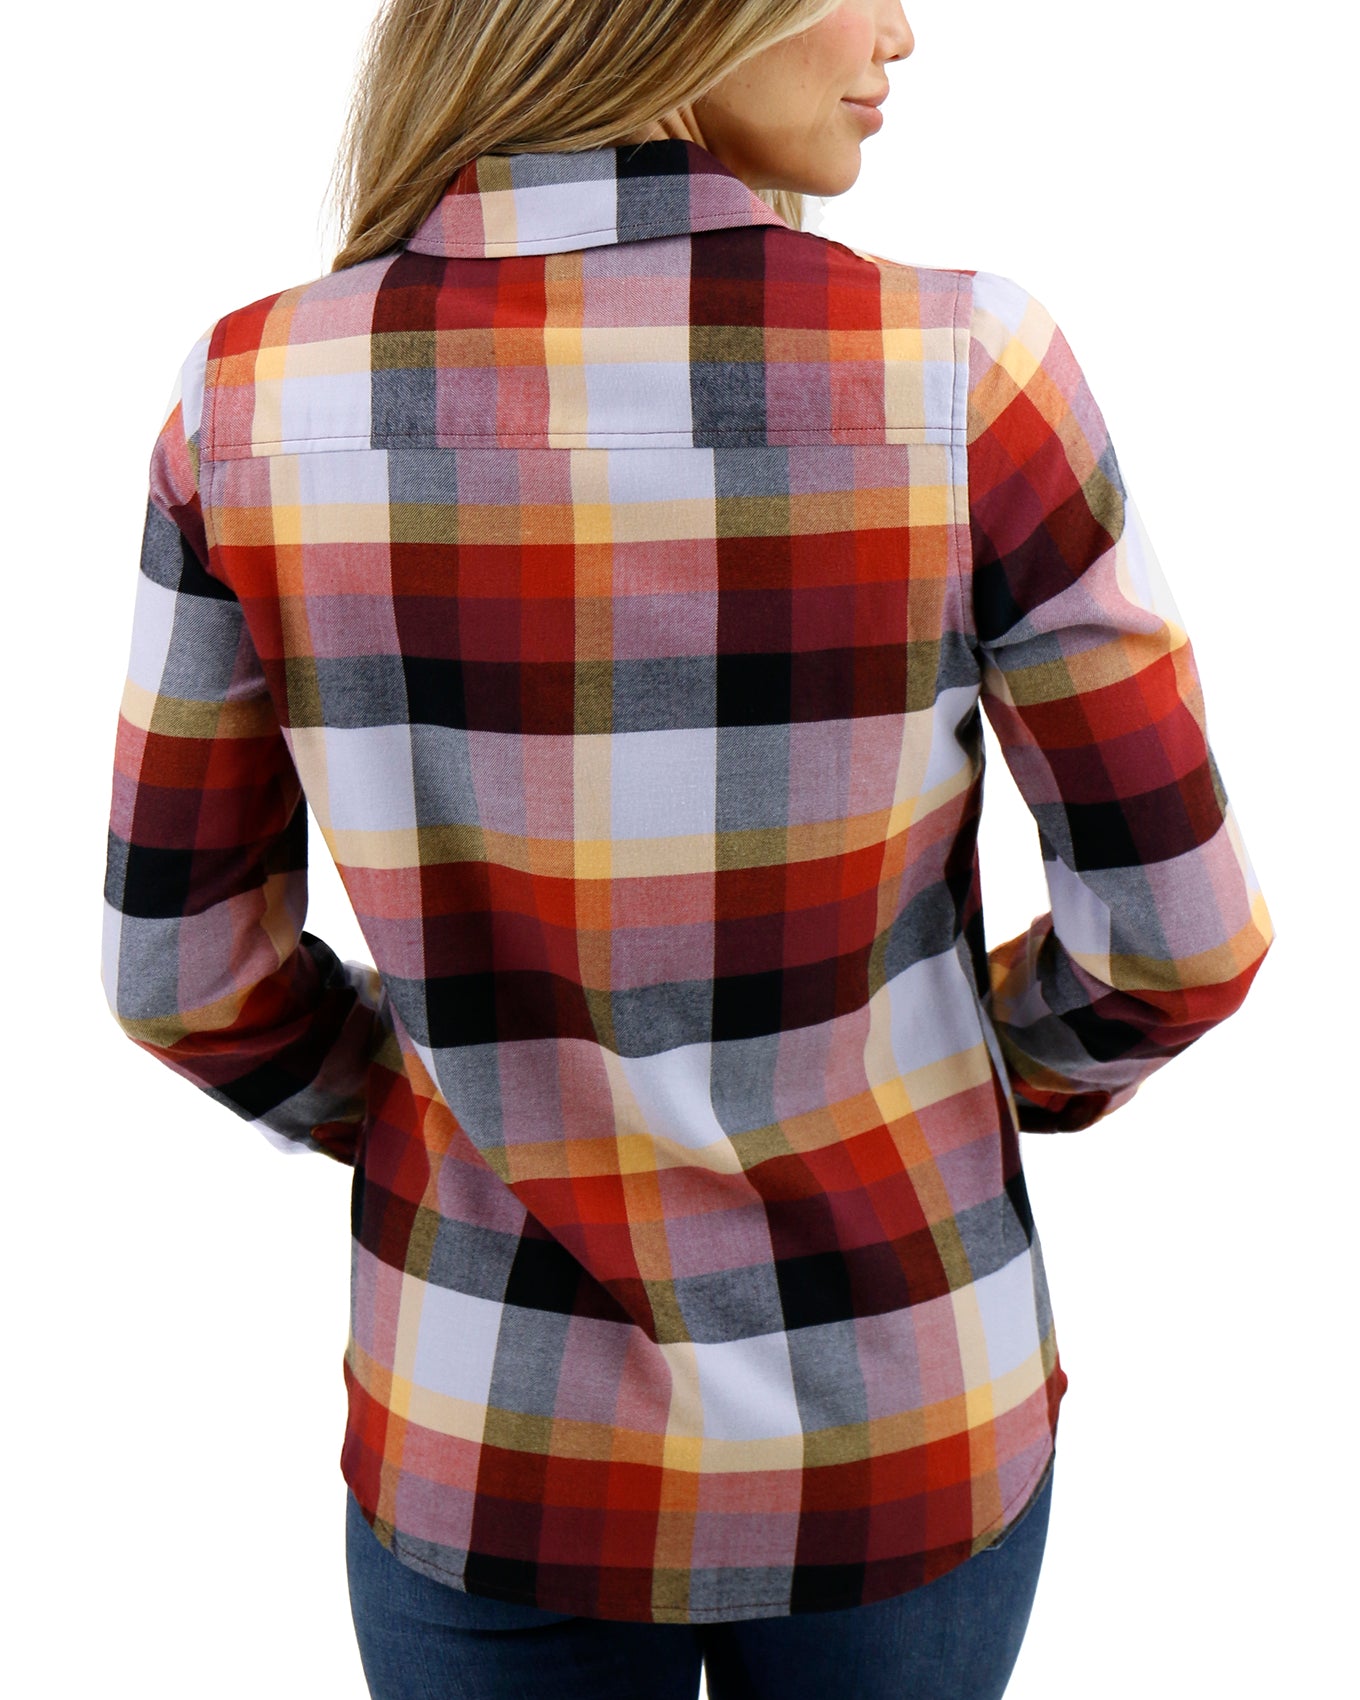 back stock shot view of plaid flannel top